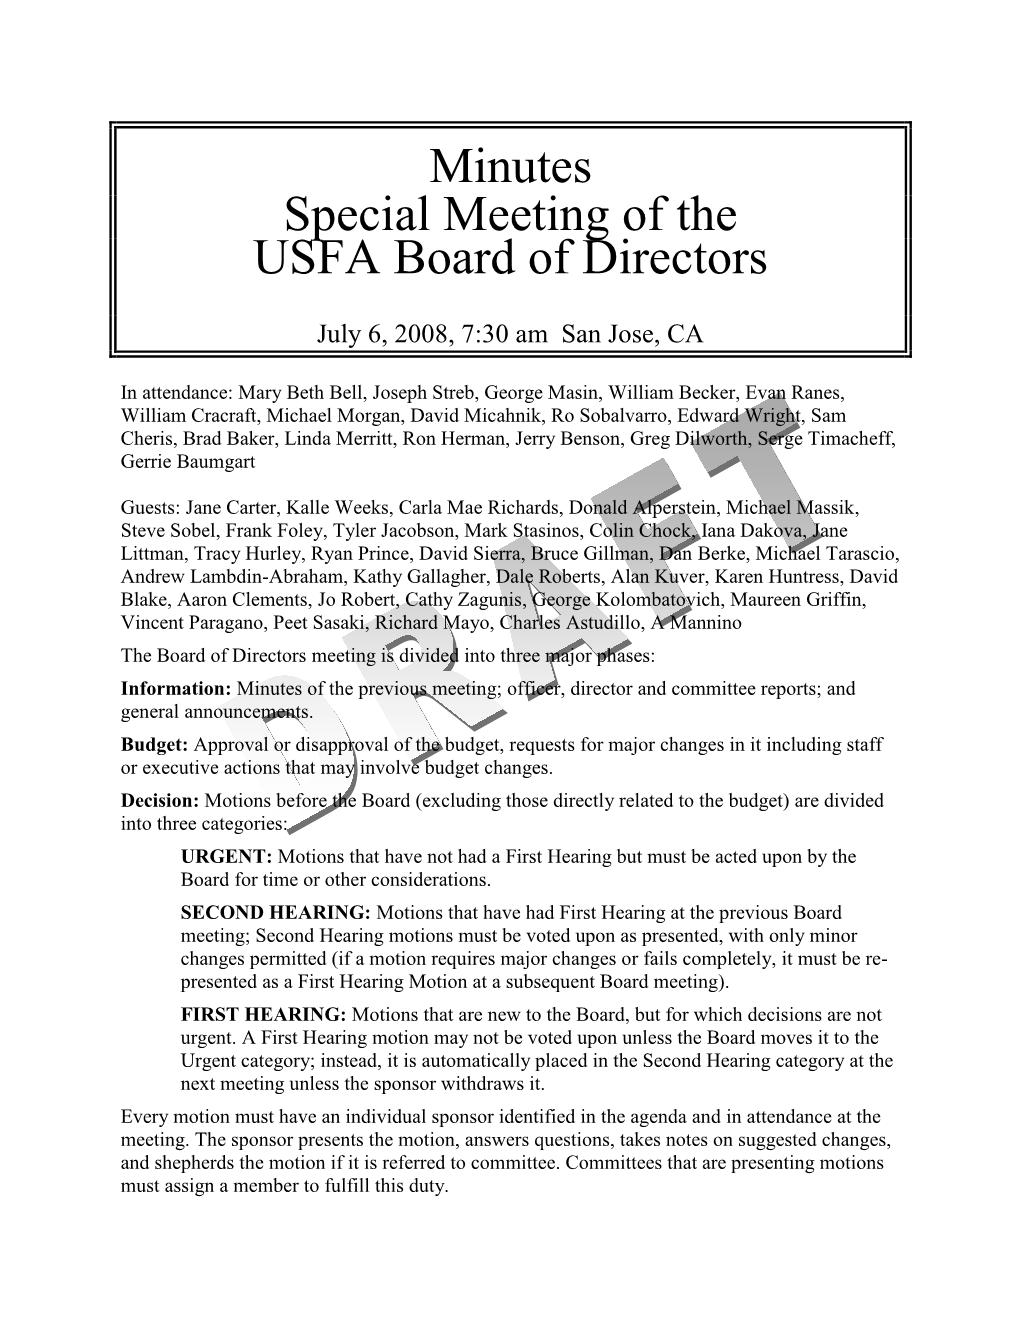 Minutes Special Meeting of the USFA Board of Directors